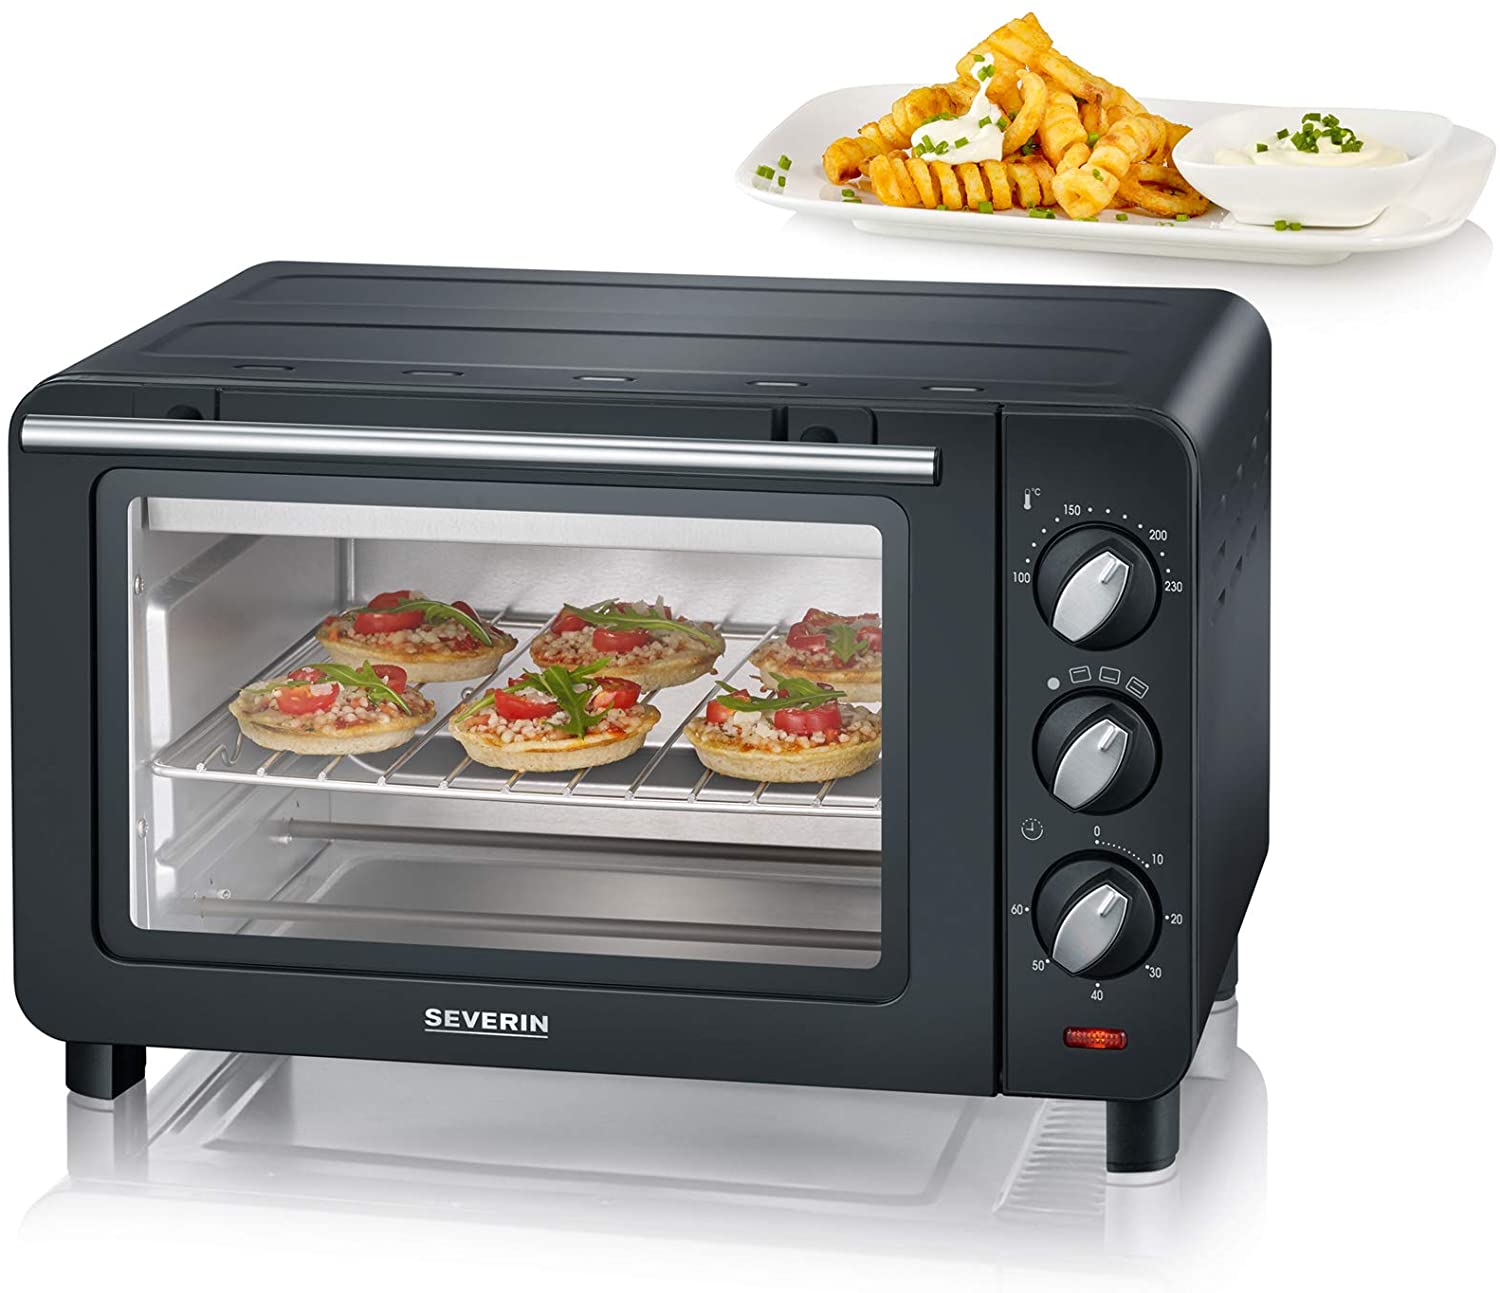 Severin TO 2064 Baking and Toast Oven, 1200 W, Incl. Cooking Grate and Baking Tray, 14 litres, Silver/Black